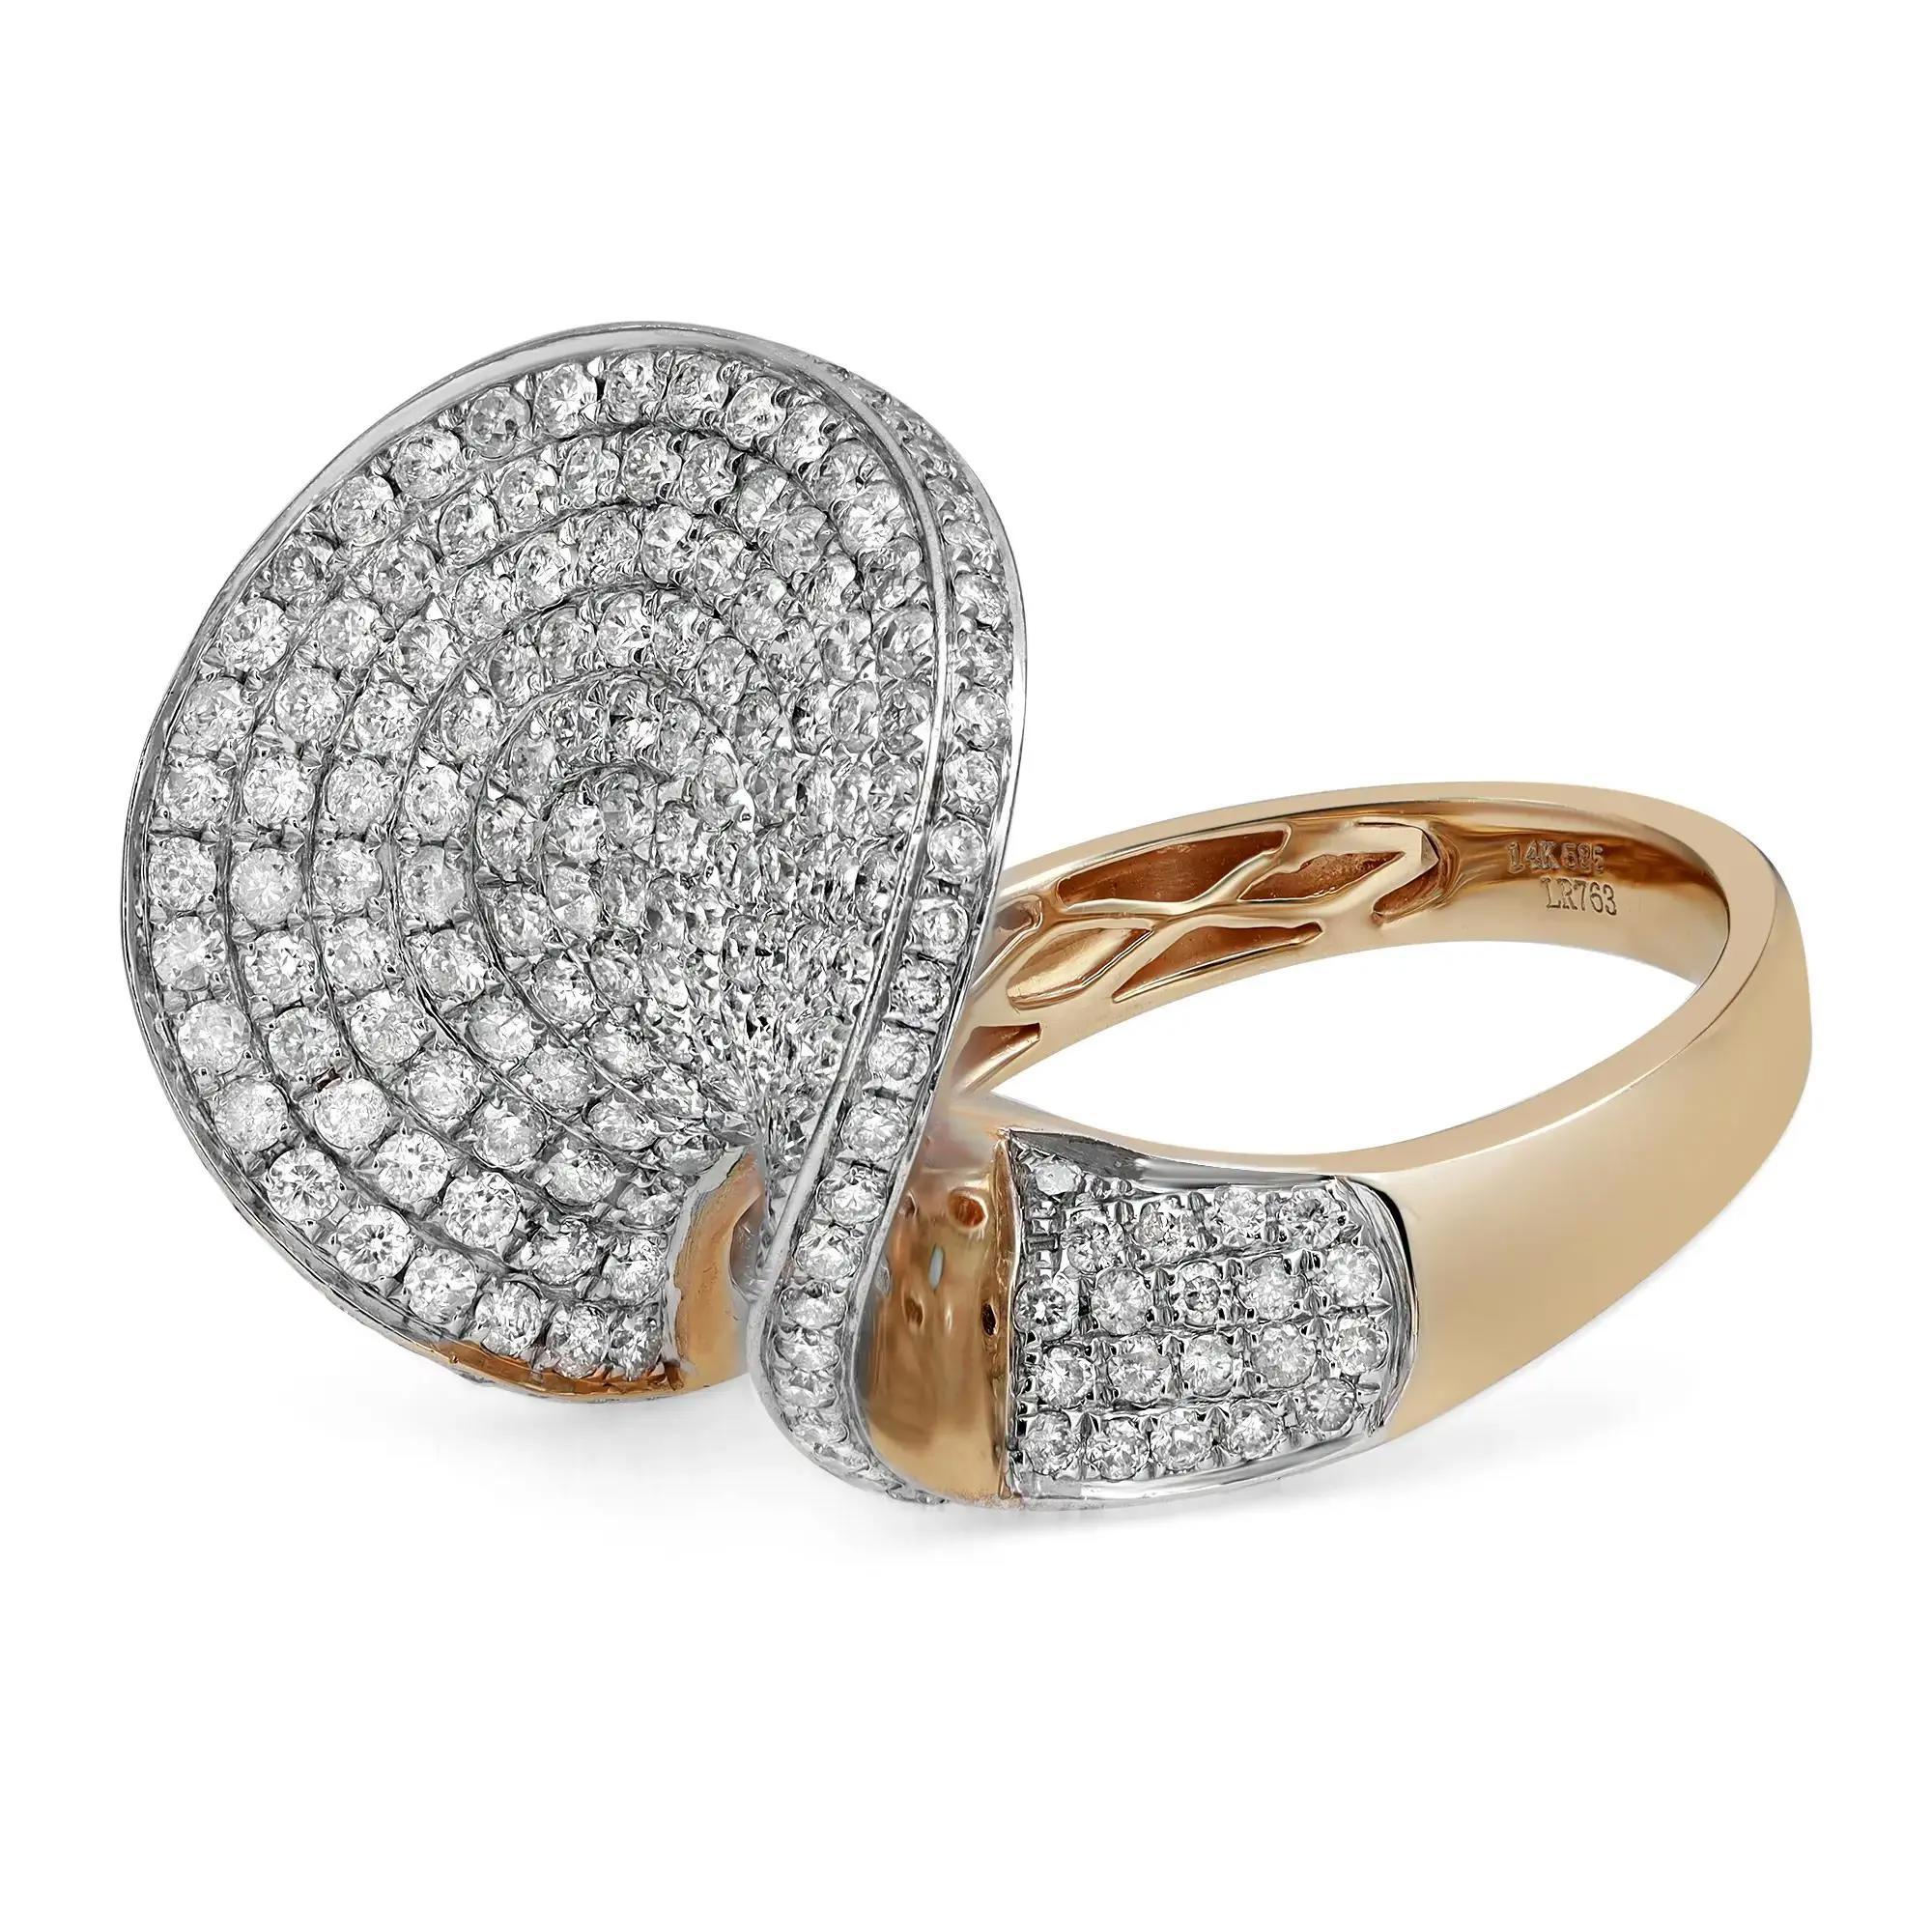 This bold and beautiful cocktail ring features pave set round cut diamonds weighing 2.35 carats. Crafted in 14k yellow gold, this ring exudes understated style and elegance. Diamond color I and SI1 clarity. Ring size 7.5. Total weight: 9.20 grams. A